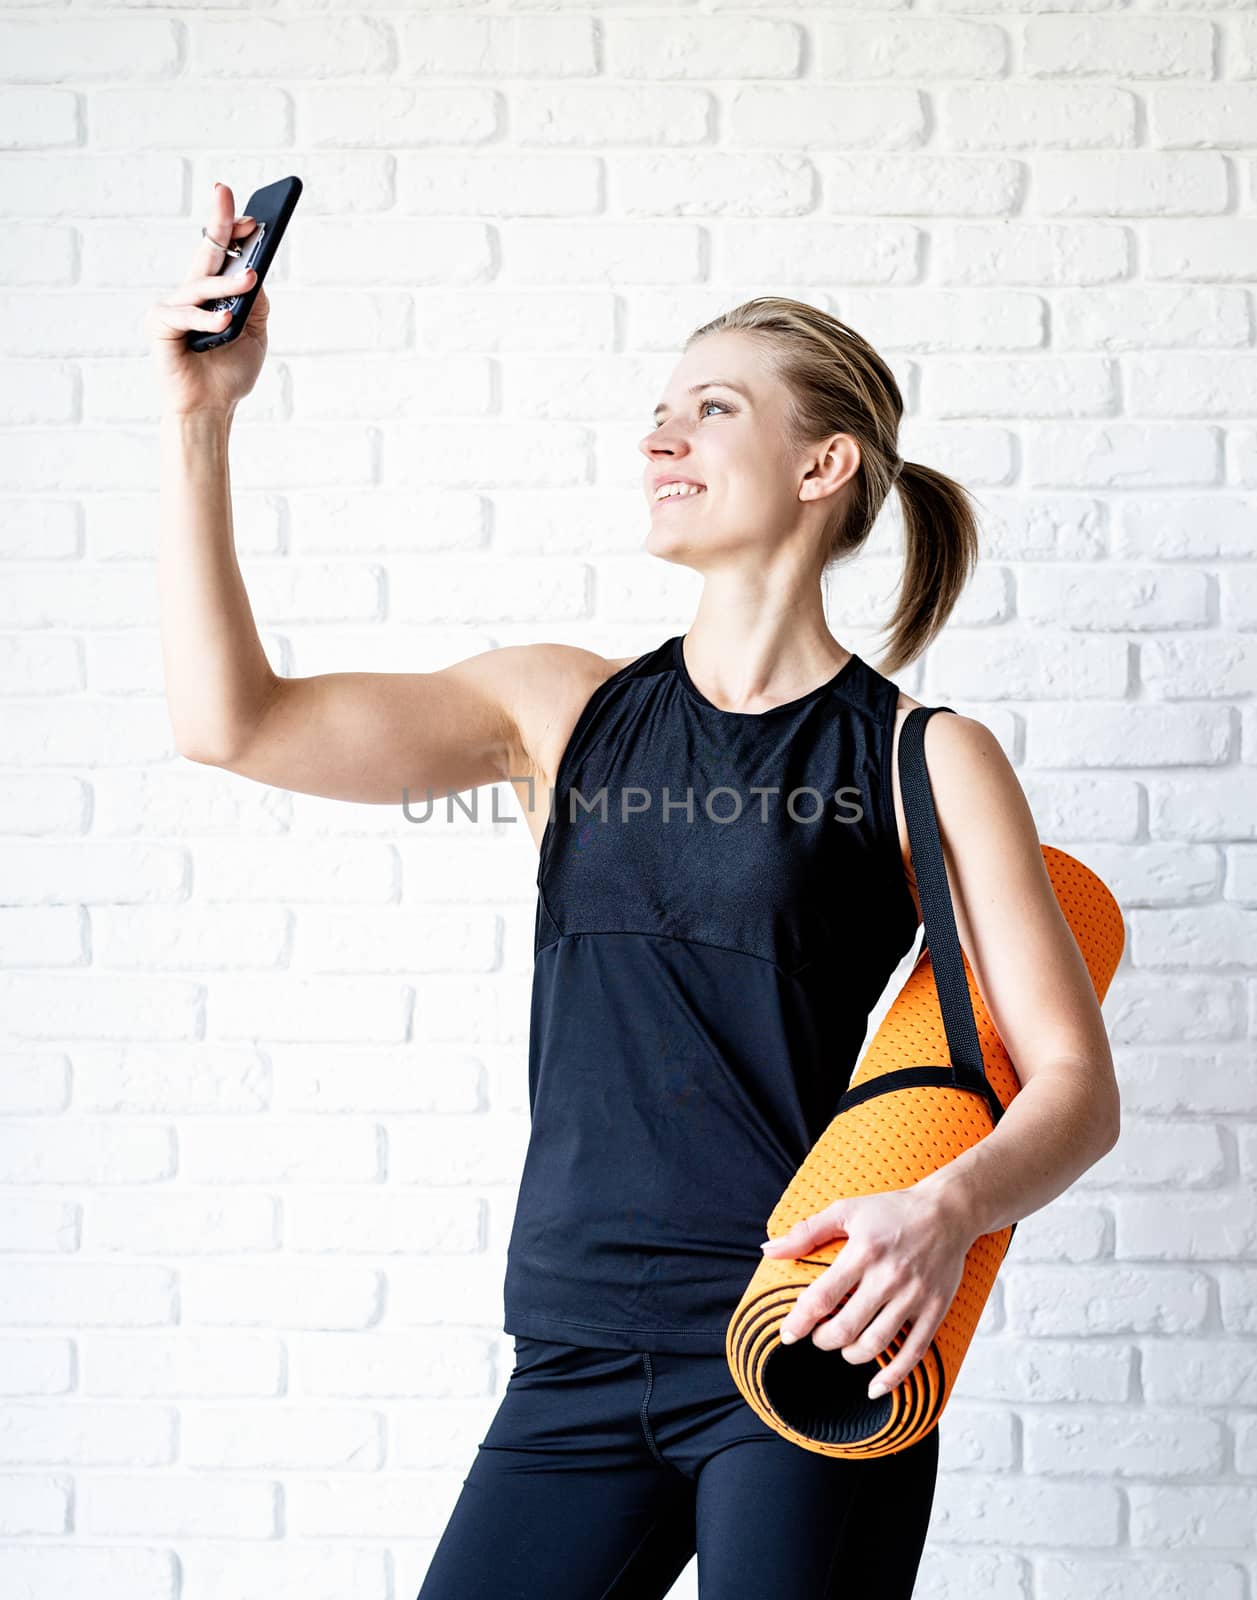 Healthy lifestyle. Sport and fitness. Young smiling fitness woman doing selfie after workout